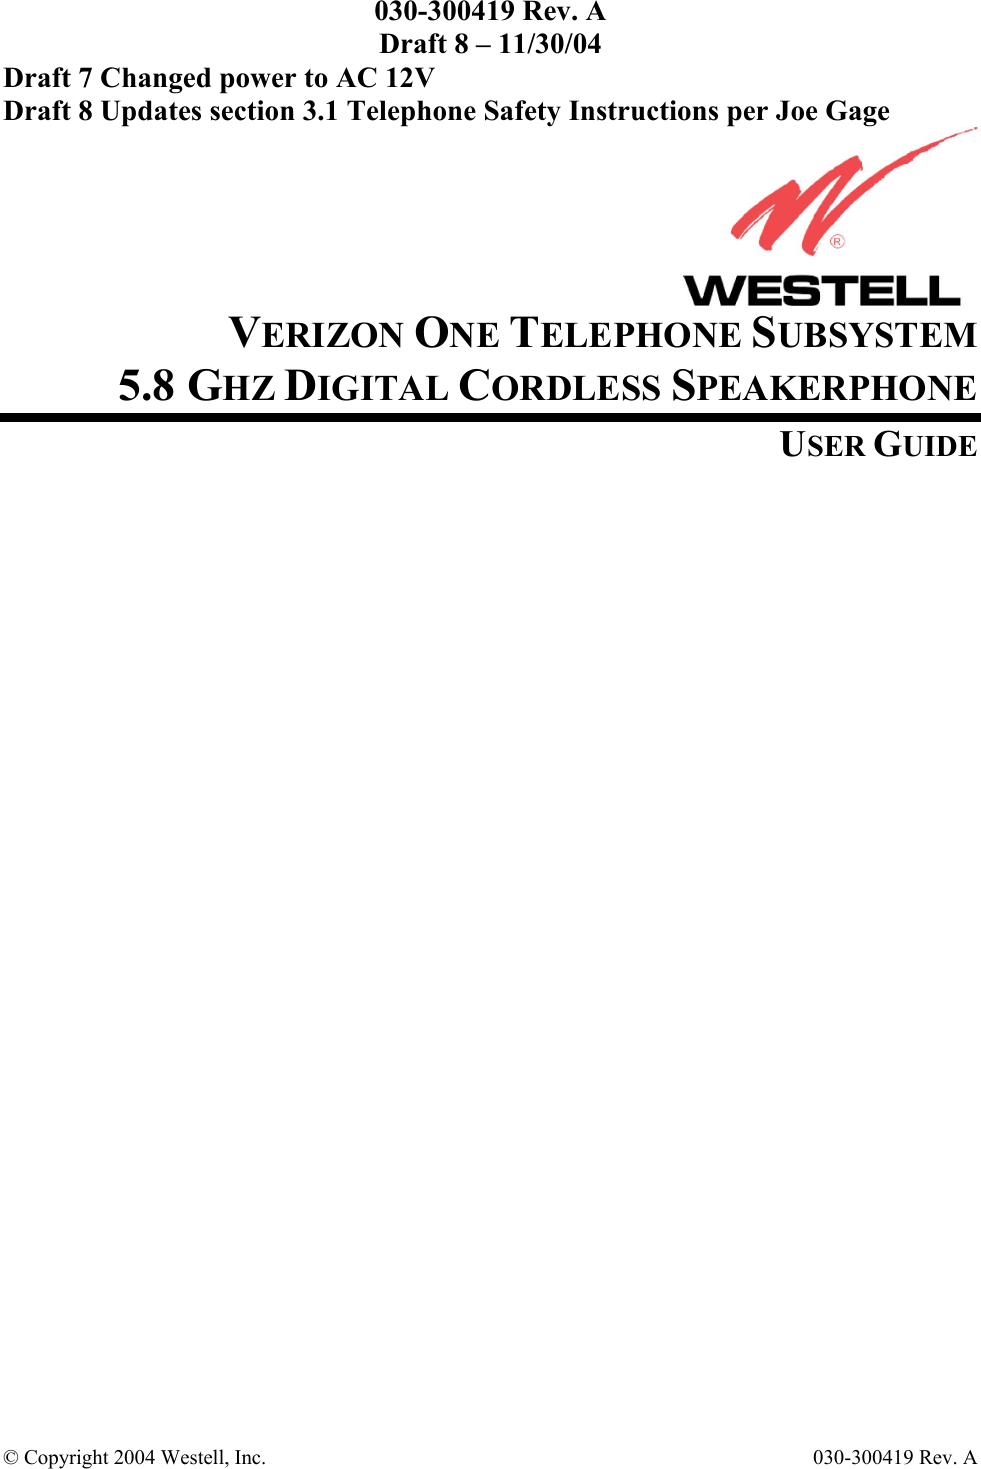 030-300419 Rev. A Draft 8 – 11/30/04 © Copyright 2004 Westell, Inc.   030-300419 Rev. A              Draft 7 Changed power to AC 12V Draft 8 Updates section 3.1 Telephone Safety Instructions per Joe Gage      VERIZON ONE TELEPHONE SUBSYSTEM 5.8 GHZ DIGITAL CORDLESS SPEAKERPHONE USER GUIDE                